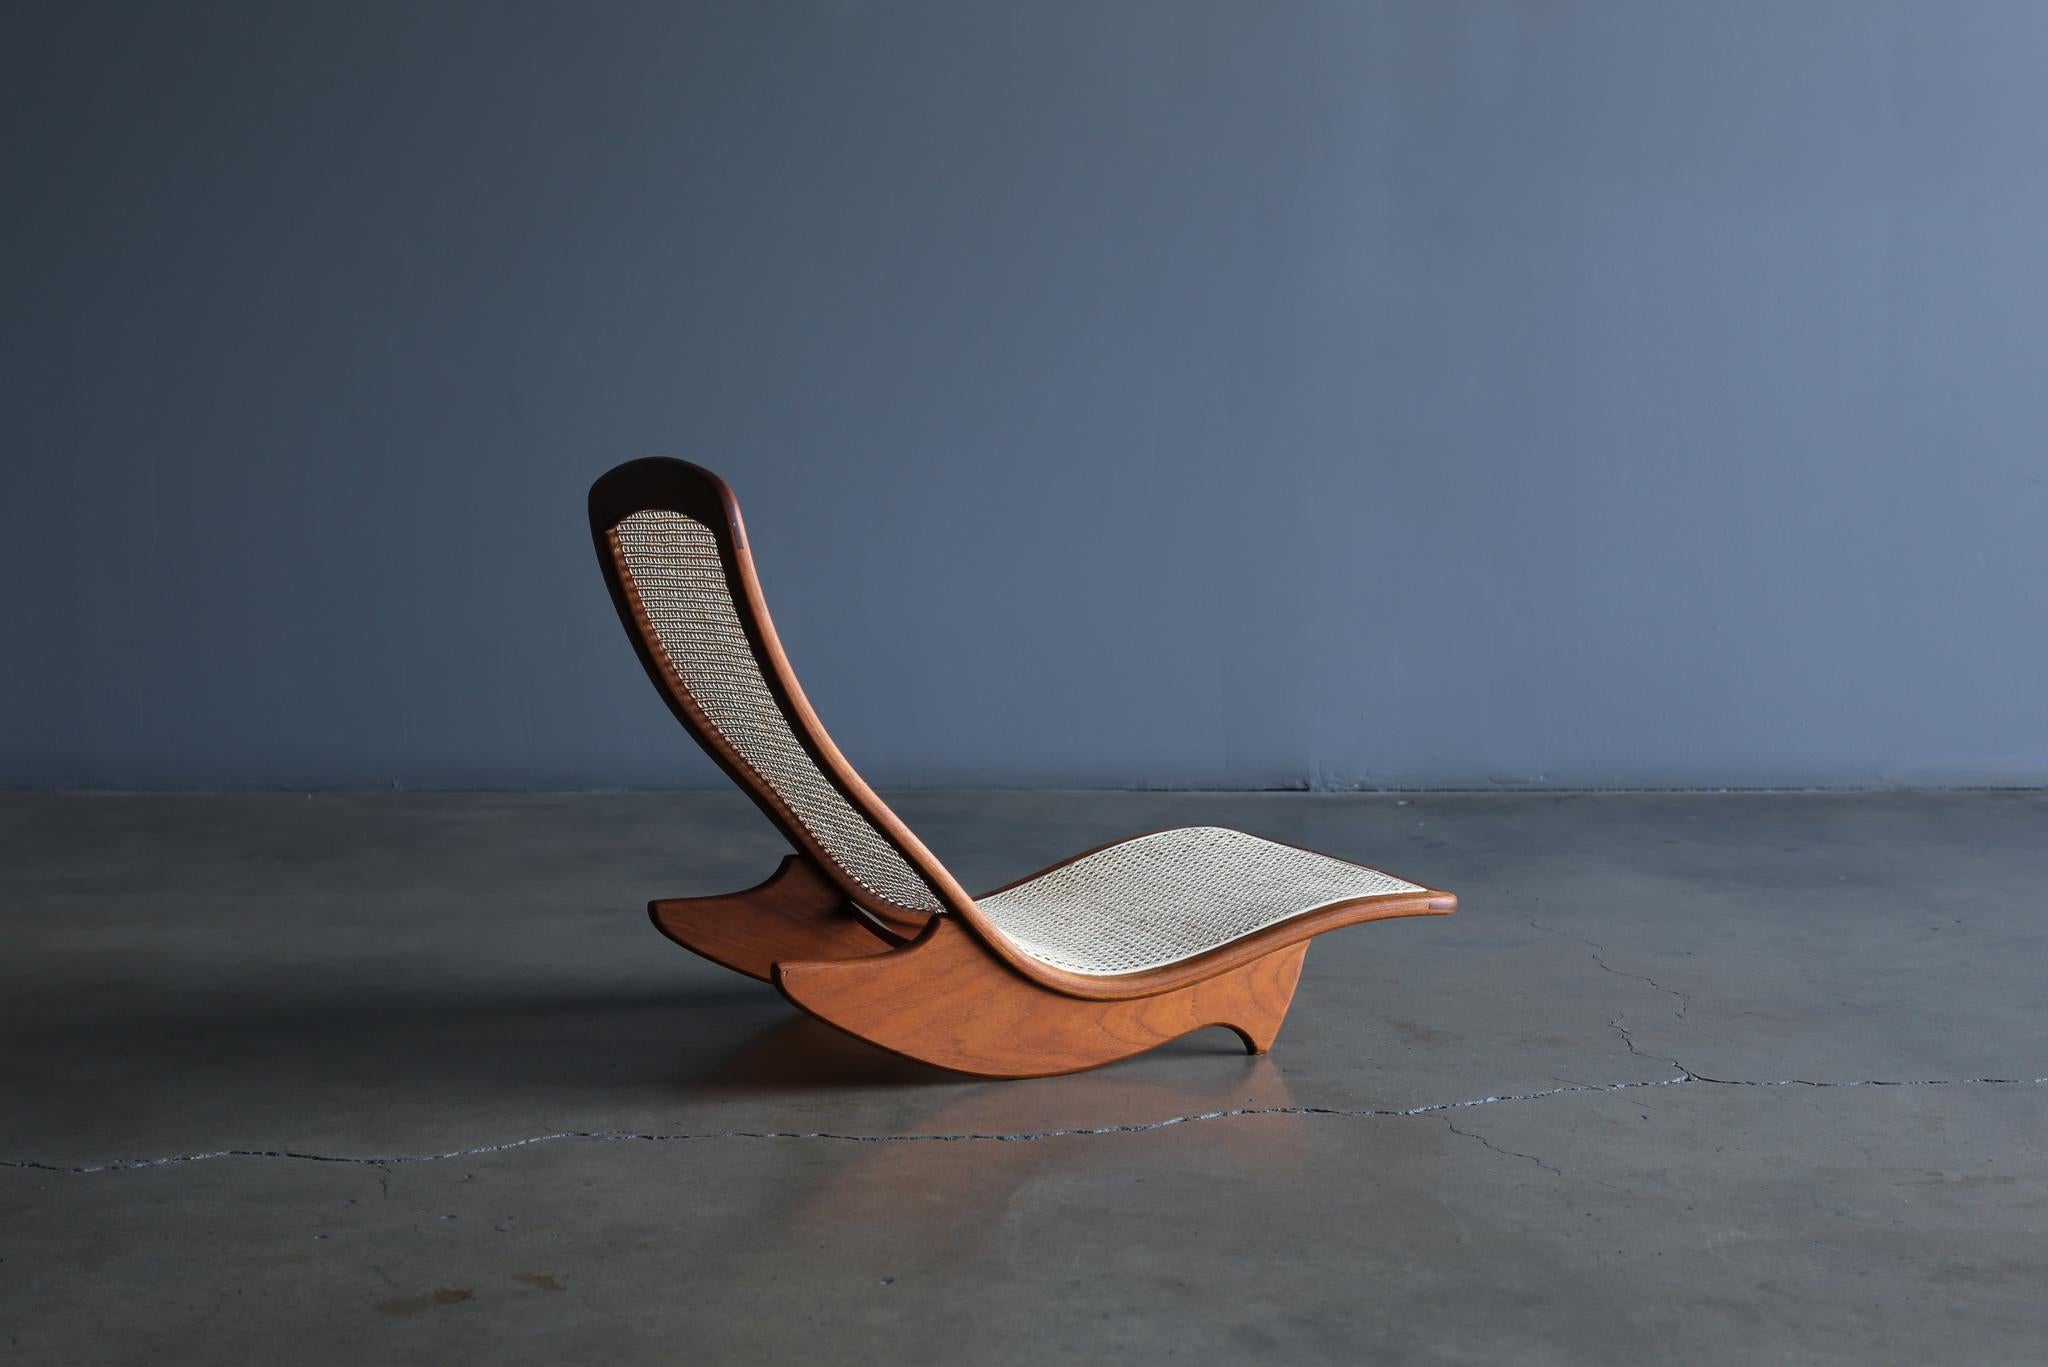 Handcrafted low rocker in teak and cane by California Artist, Steven Rieman. The design was exhibited at the Pasadena Museum of Art as part of the seminal California Design 76. Rieman was a graduate of the prestigious ArtCenter College and moved to